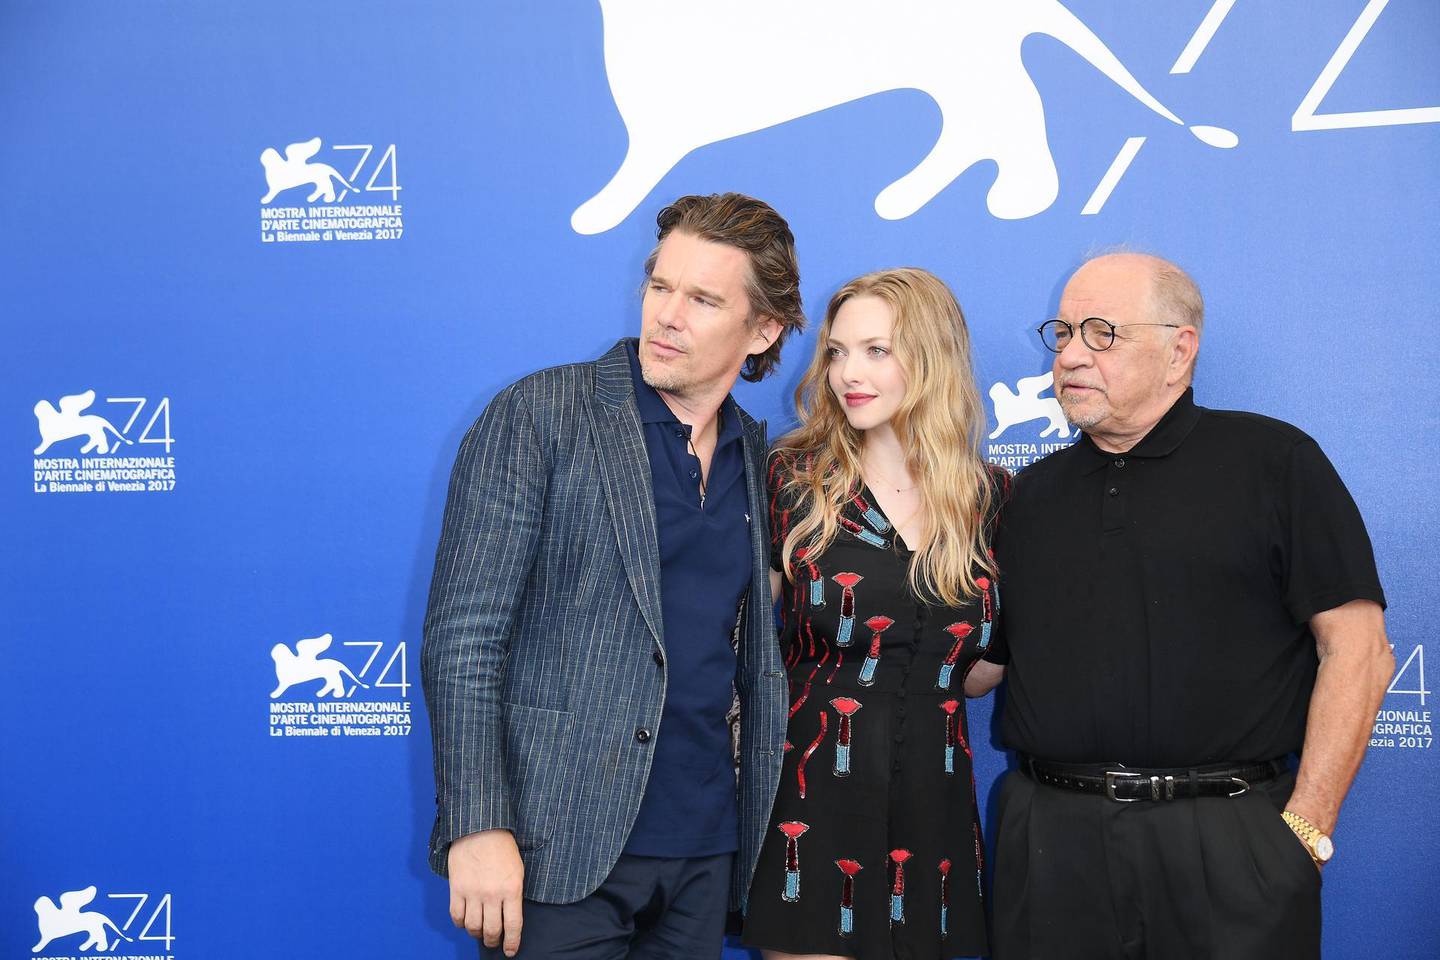 VENICE, ITALY - AUGUST 31:  (L-R) Ethan Hawke, Amanda Seyfried and Paul Schrader attend the 'First Reformed' photocall during the 74th Venice Film Festival on August 31, 2017 in Venice, Italy.  (Photo by Venturelli/WireImage)